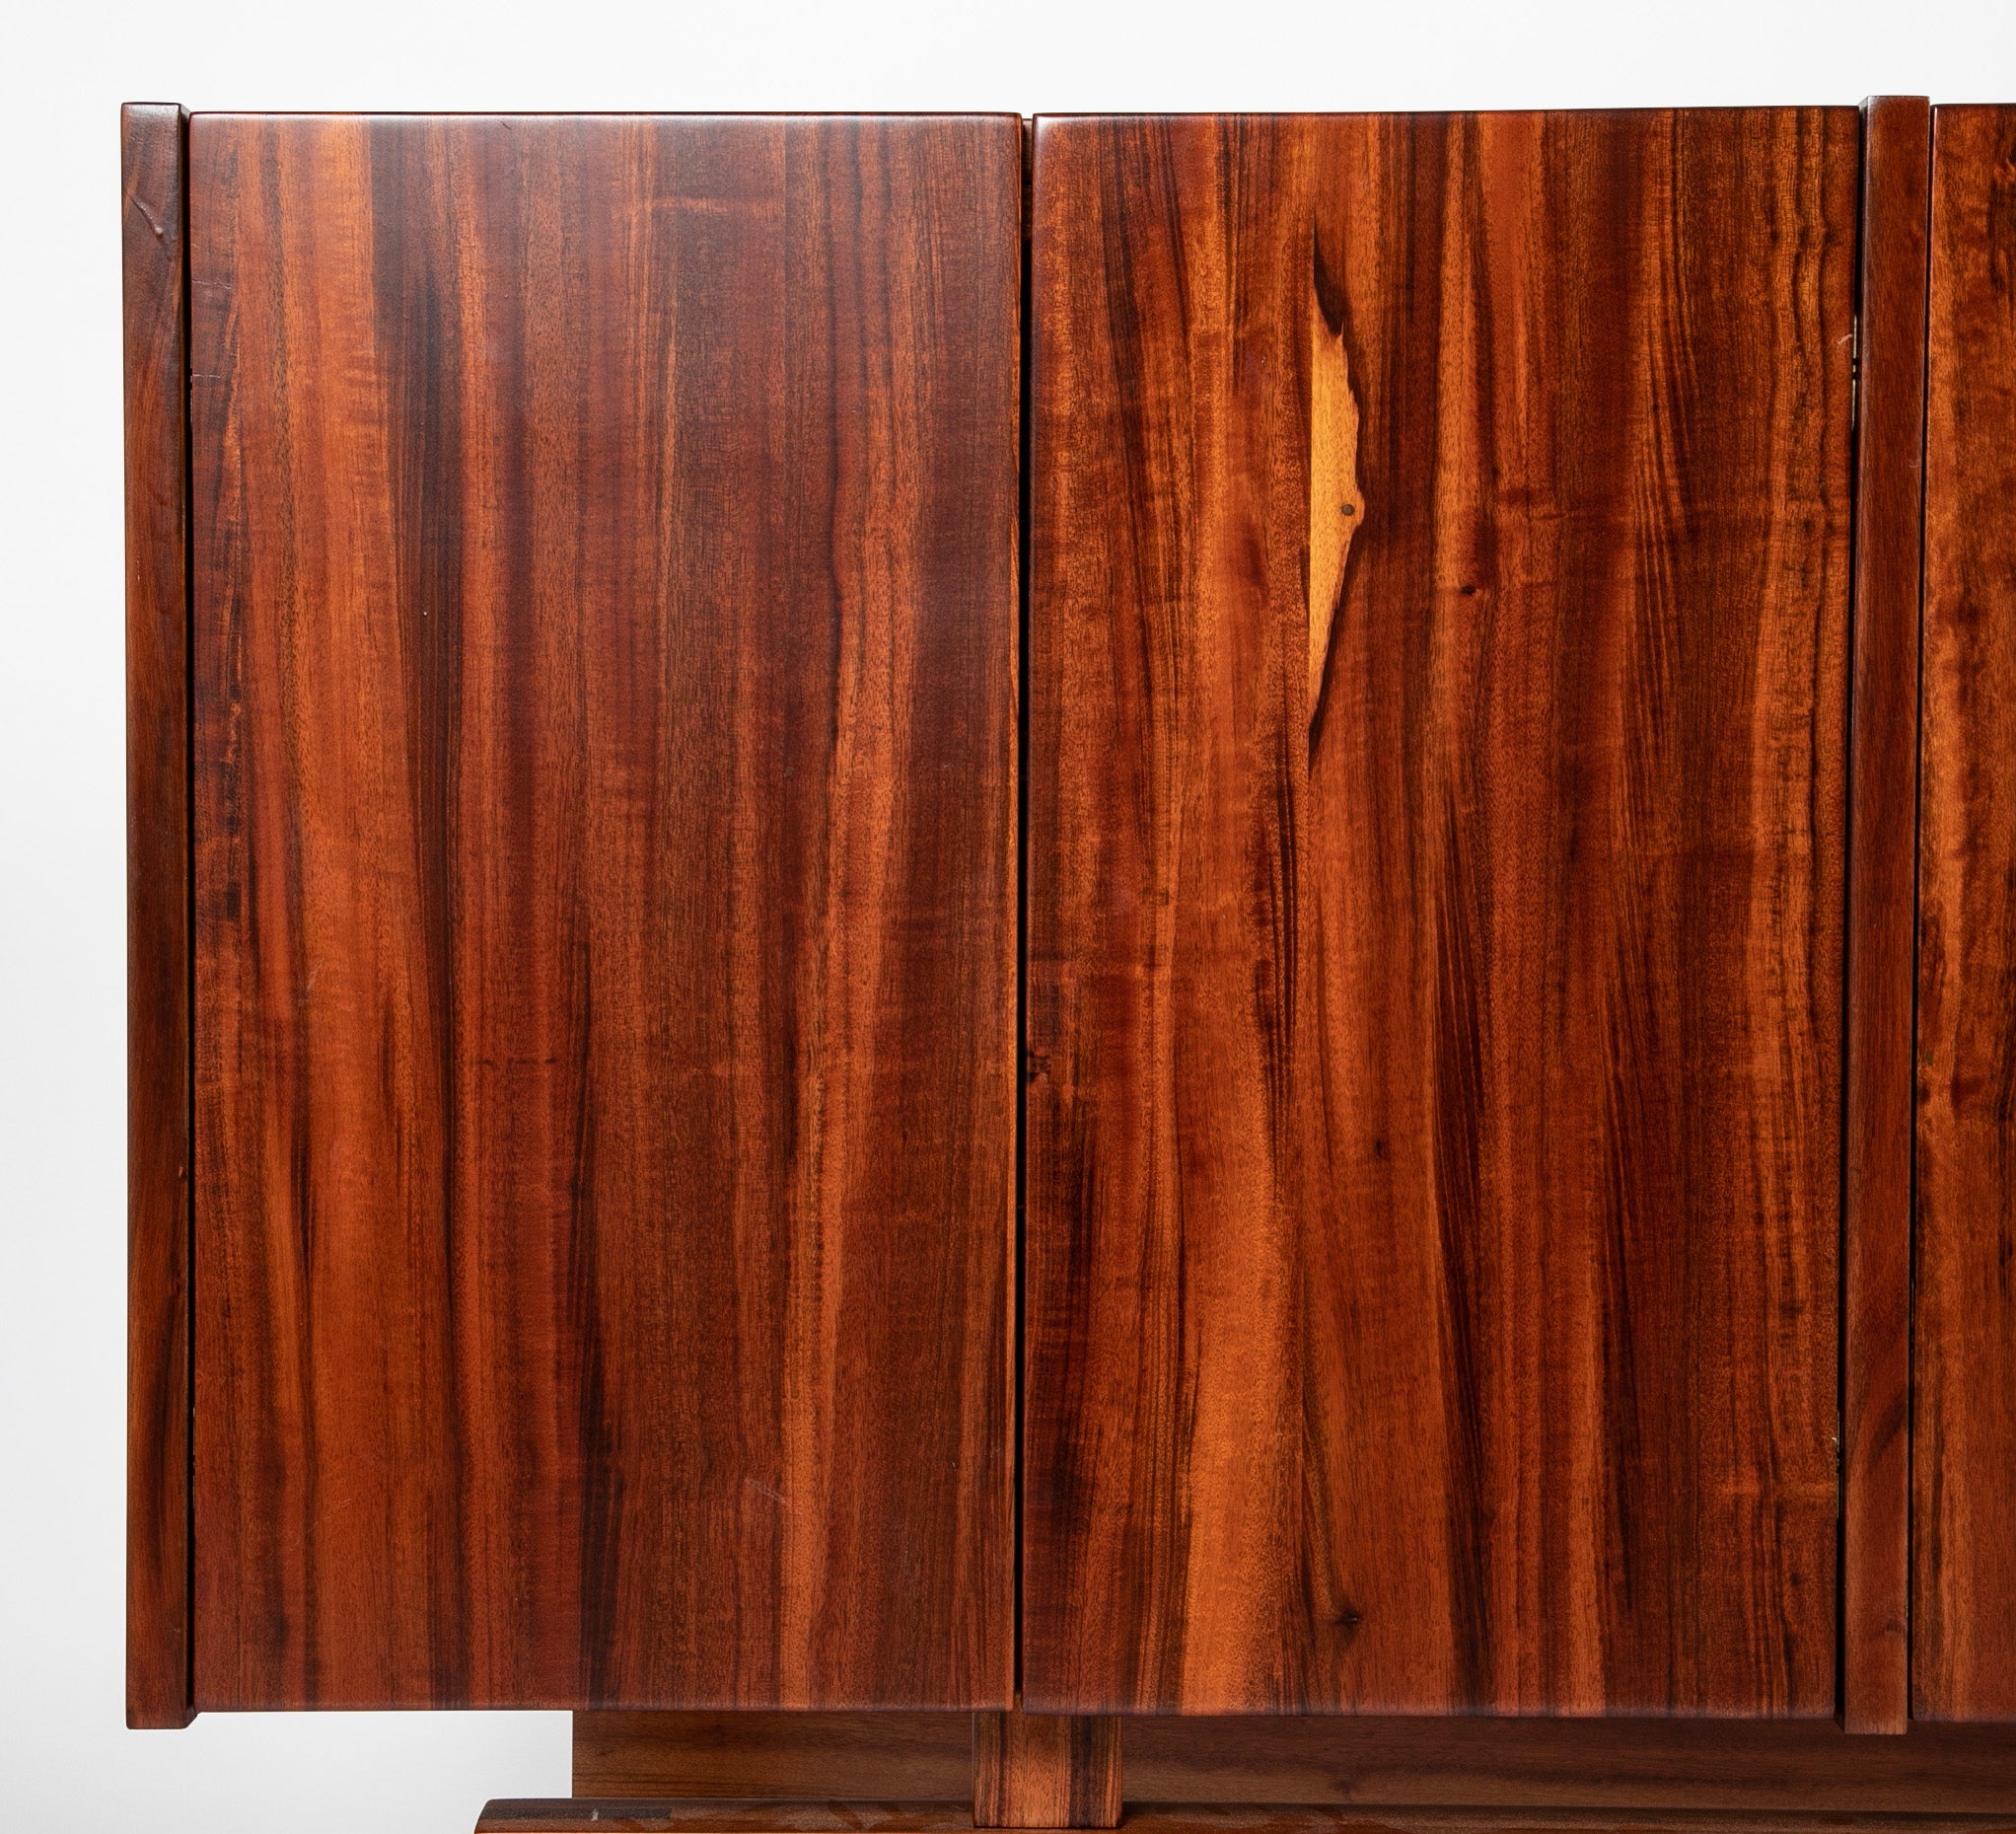 Custom Designed Solid Rosewood Sideboard by Design One Inc.